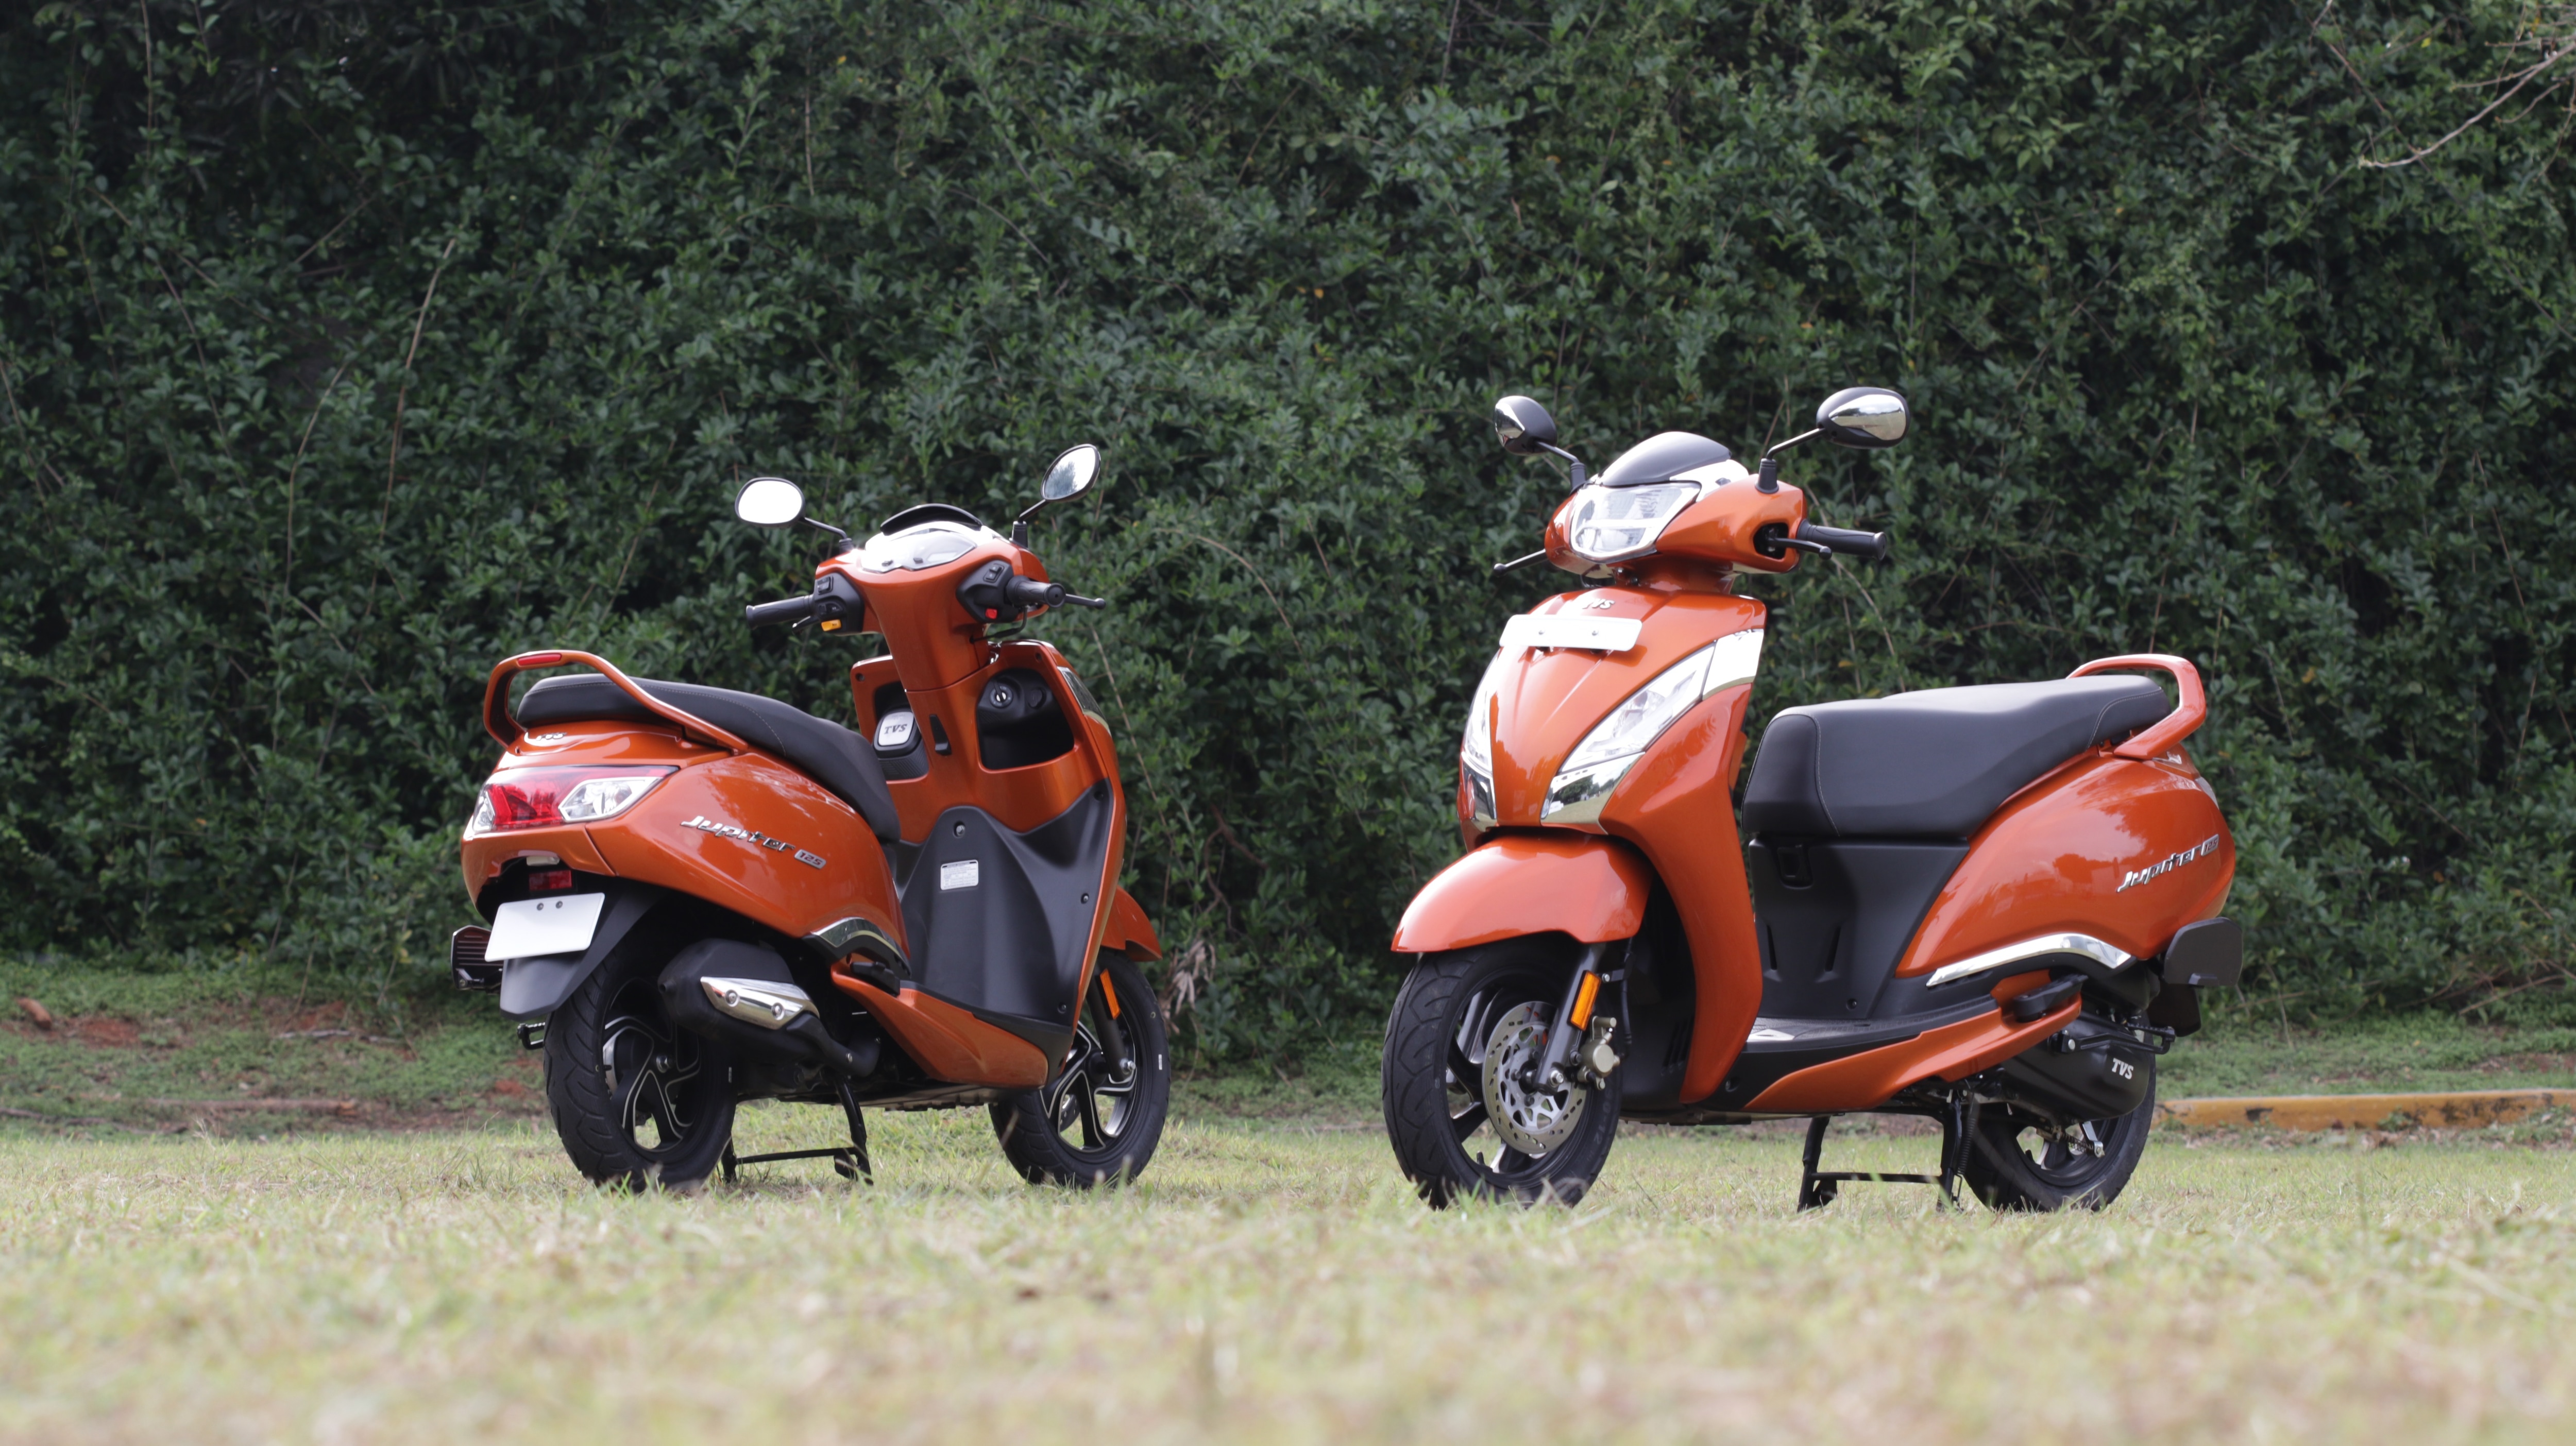 The Jupiter 125 receives the Intelli-Go technology from TVS which boosts the overall efficiency of the scooter.